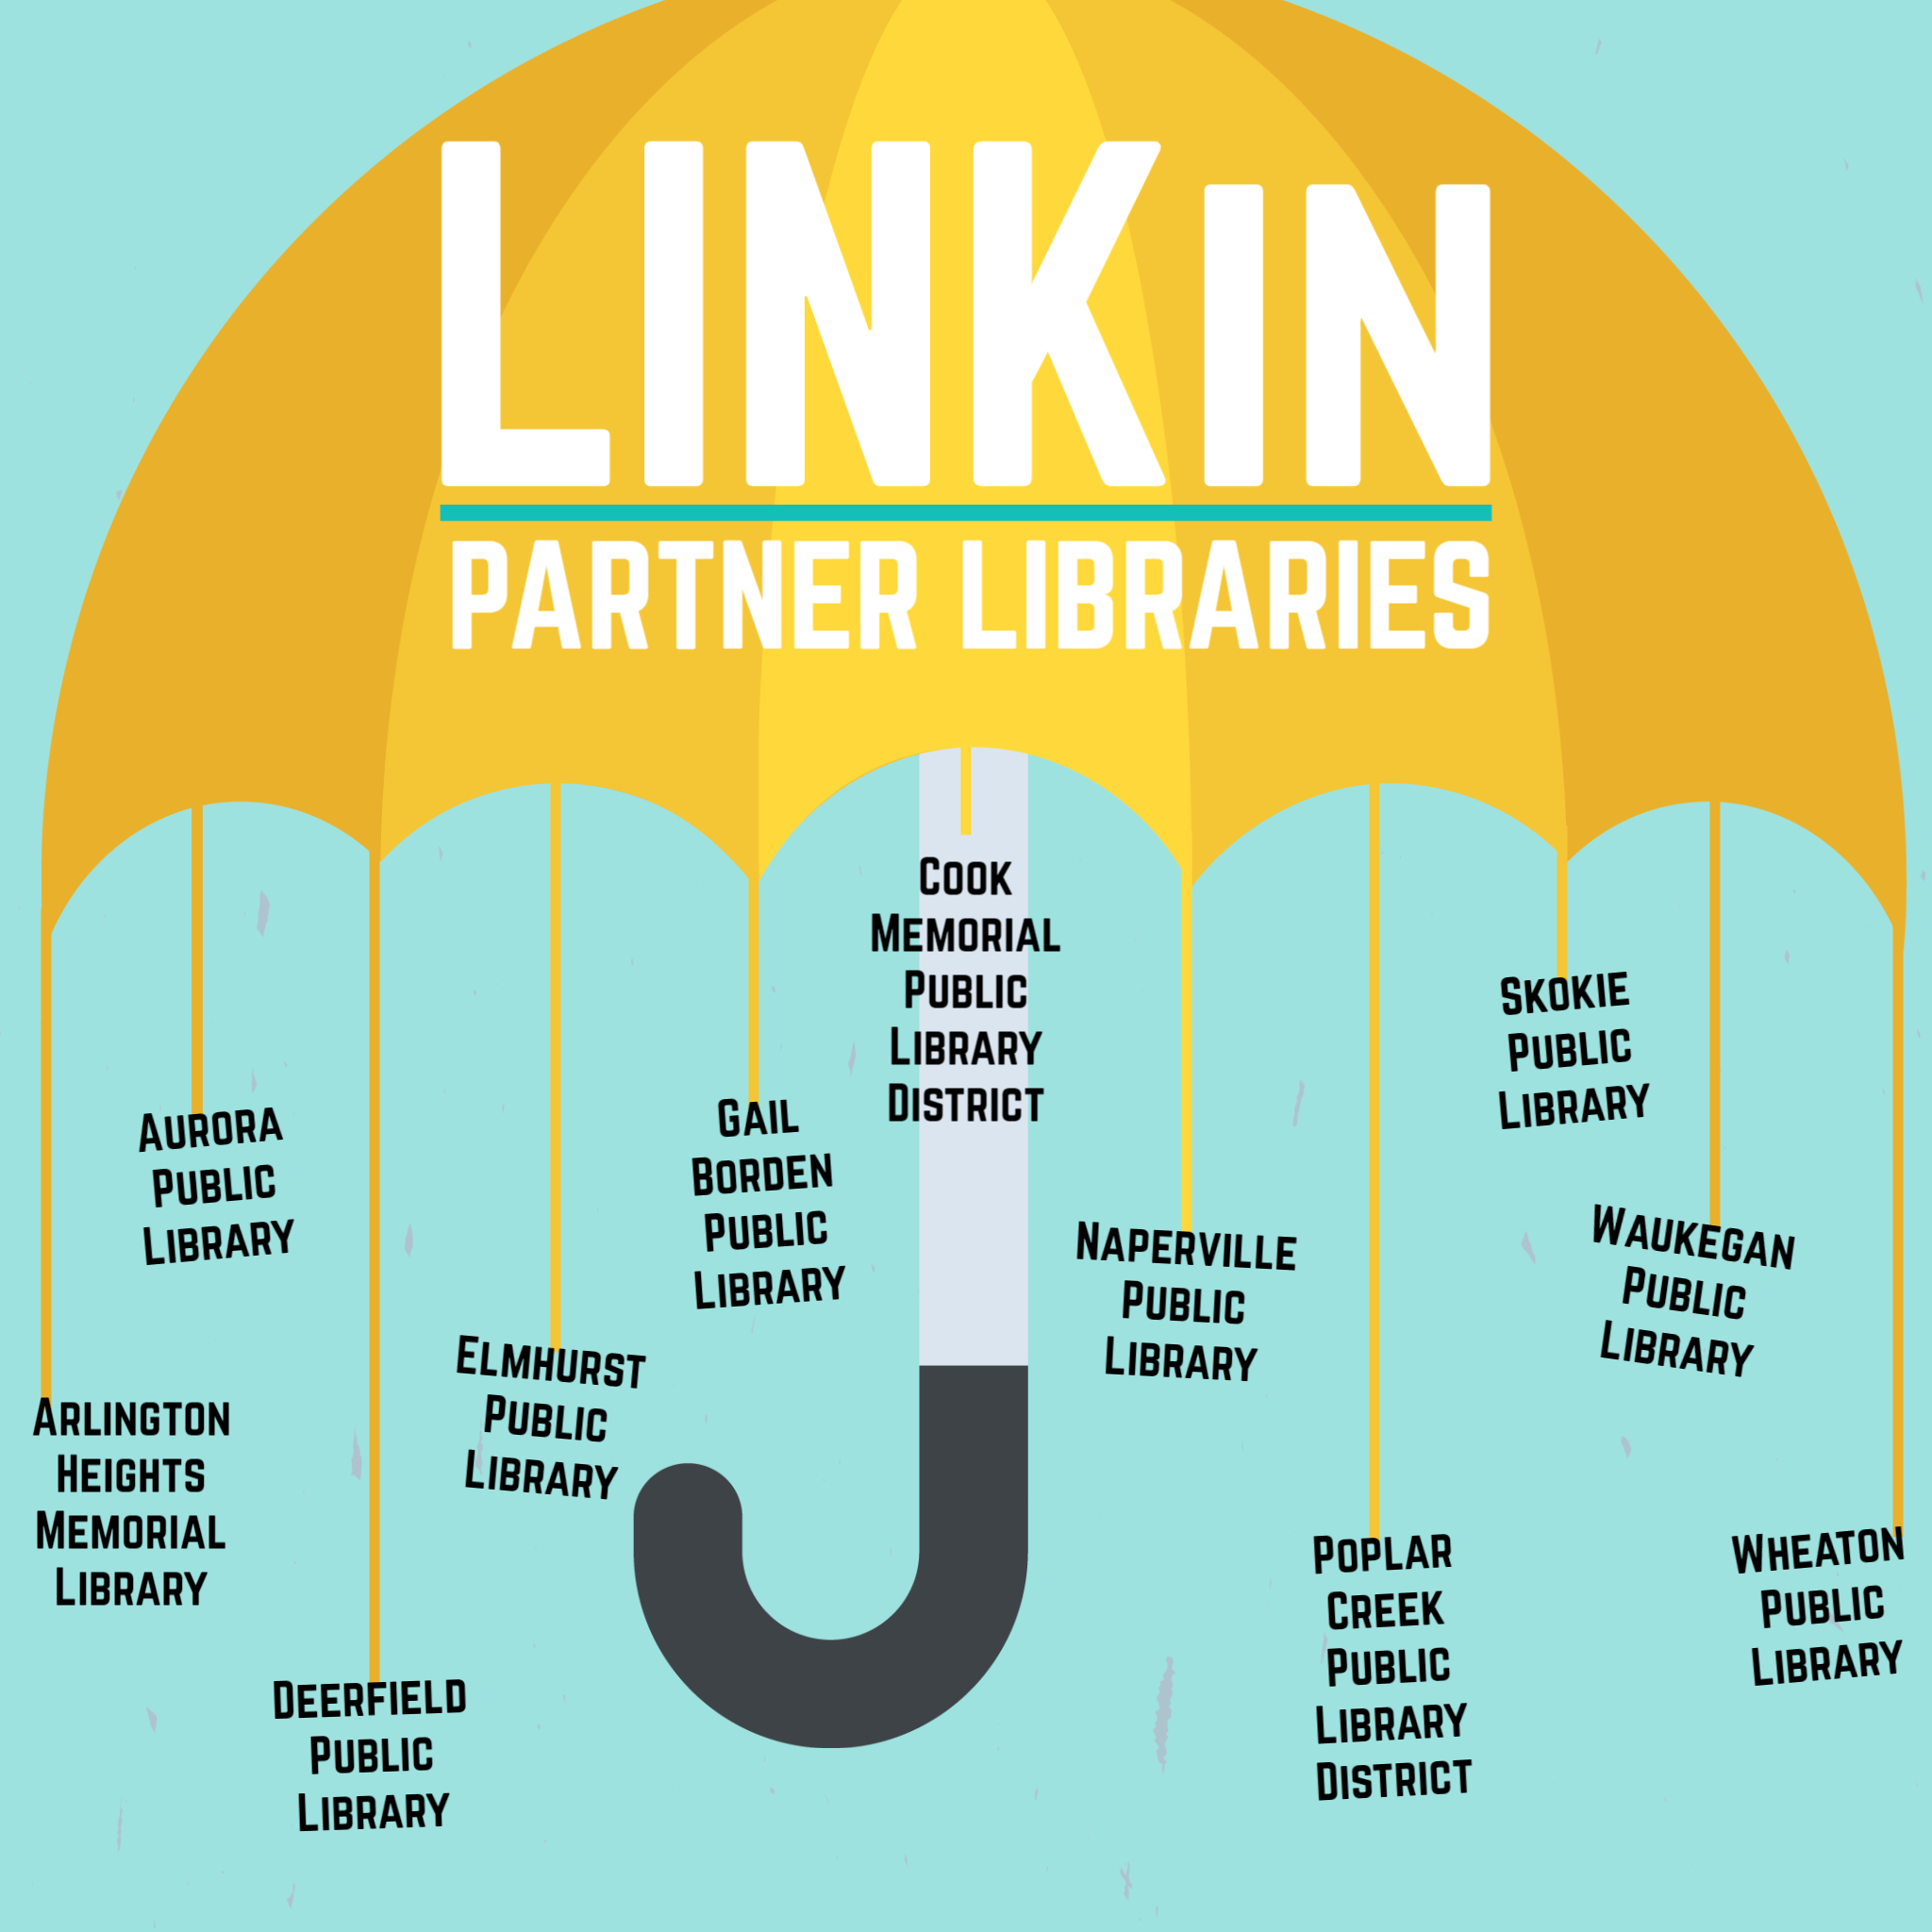 image of a LINKin umbrella showing the 11 partner library names below it